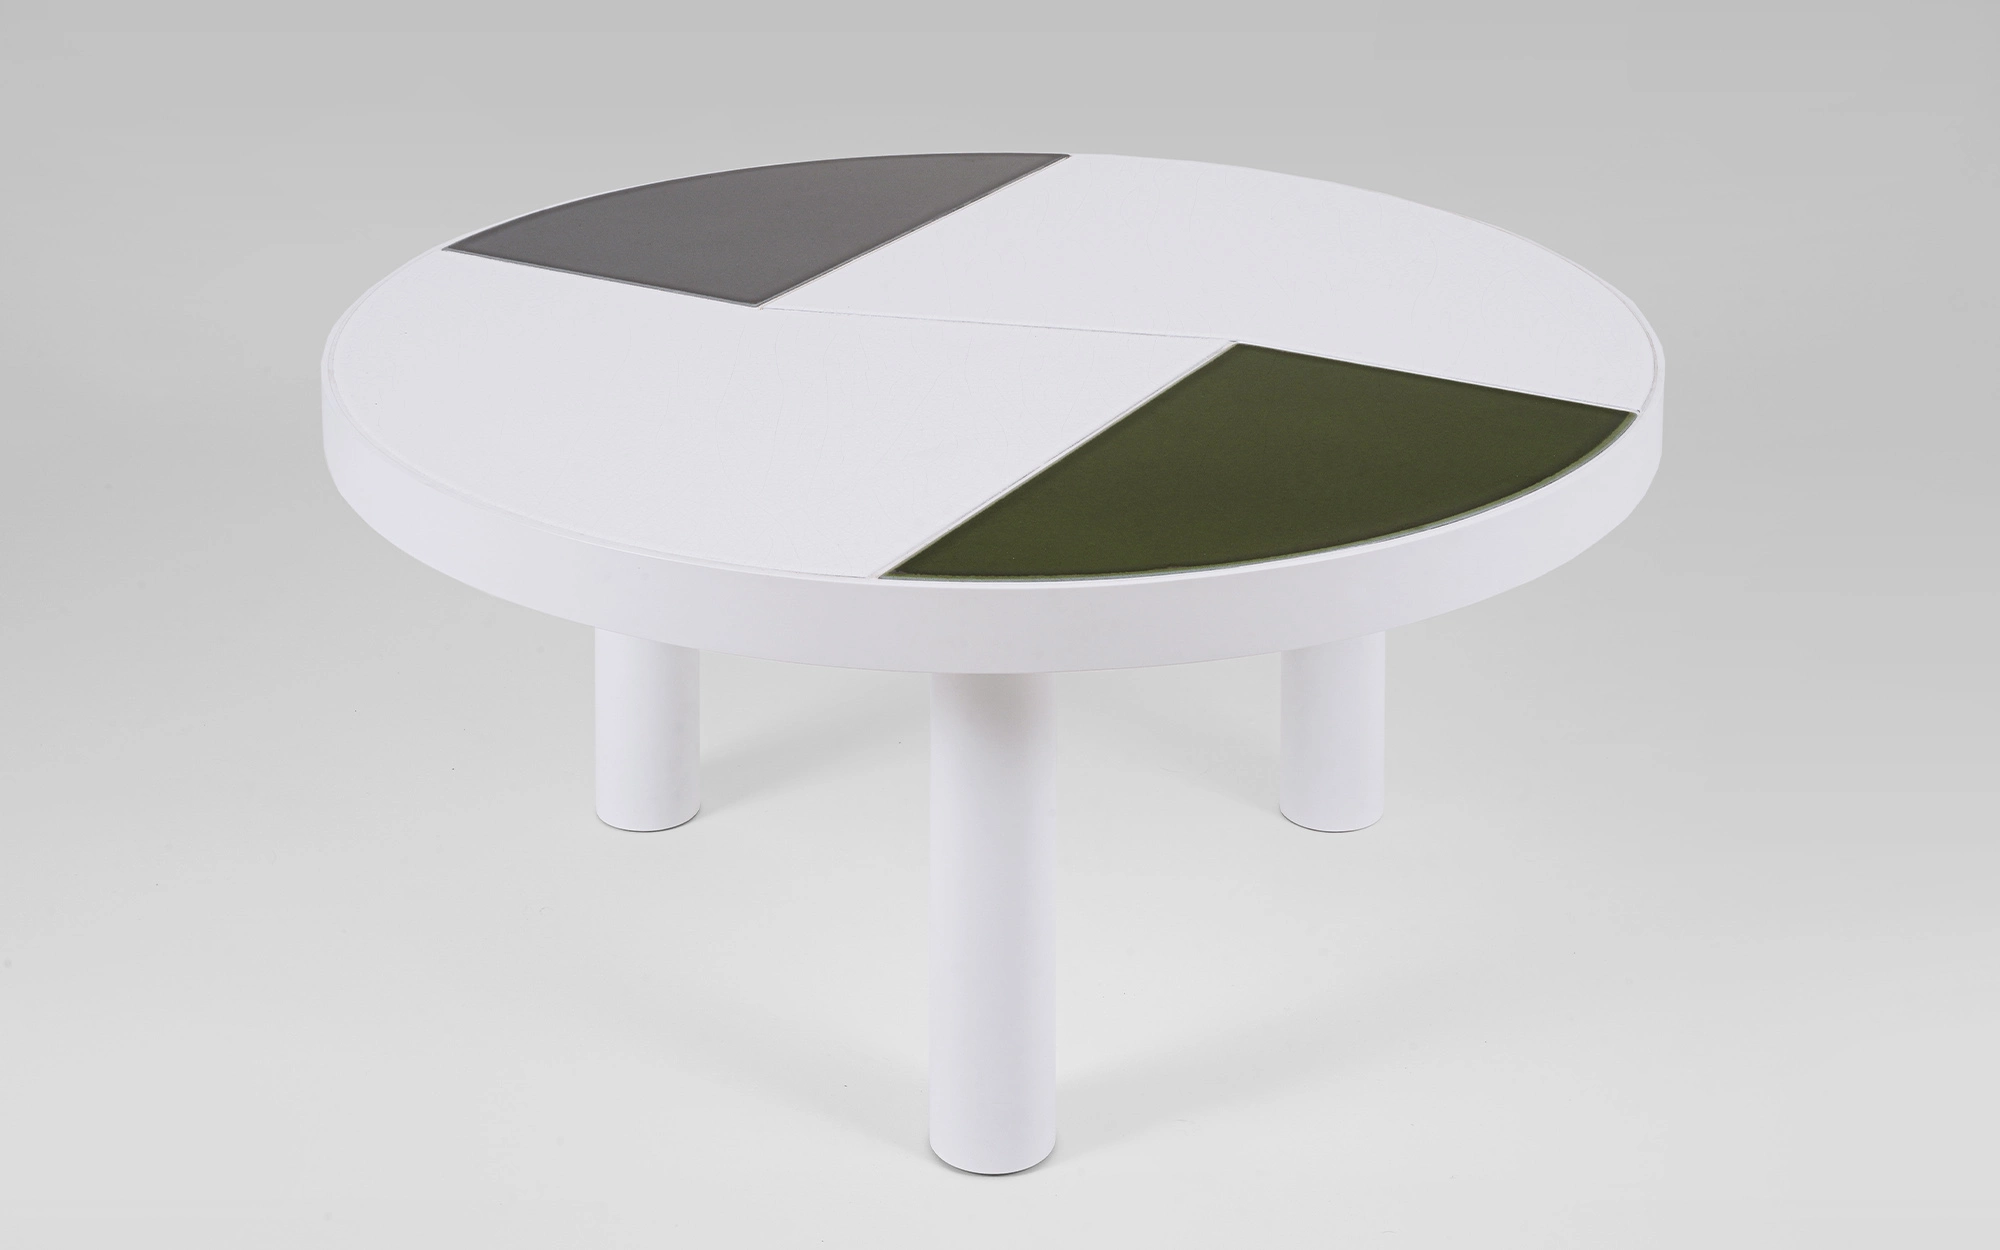 Pierre Charpin Fraction Coffee Table